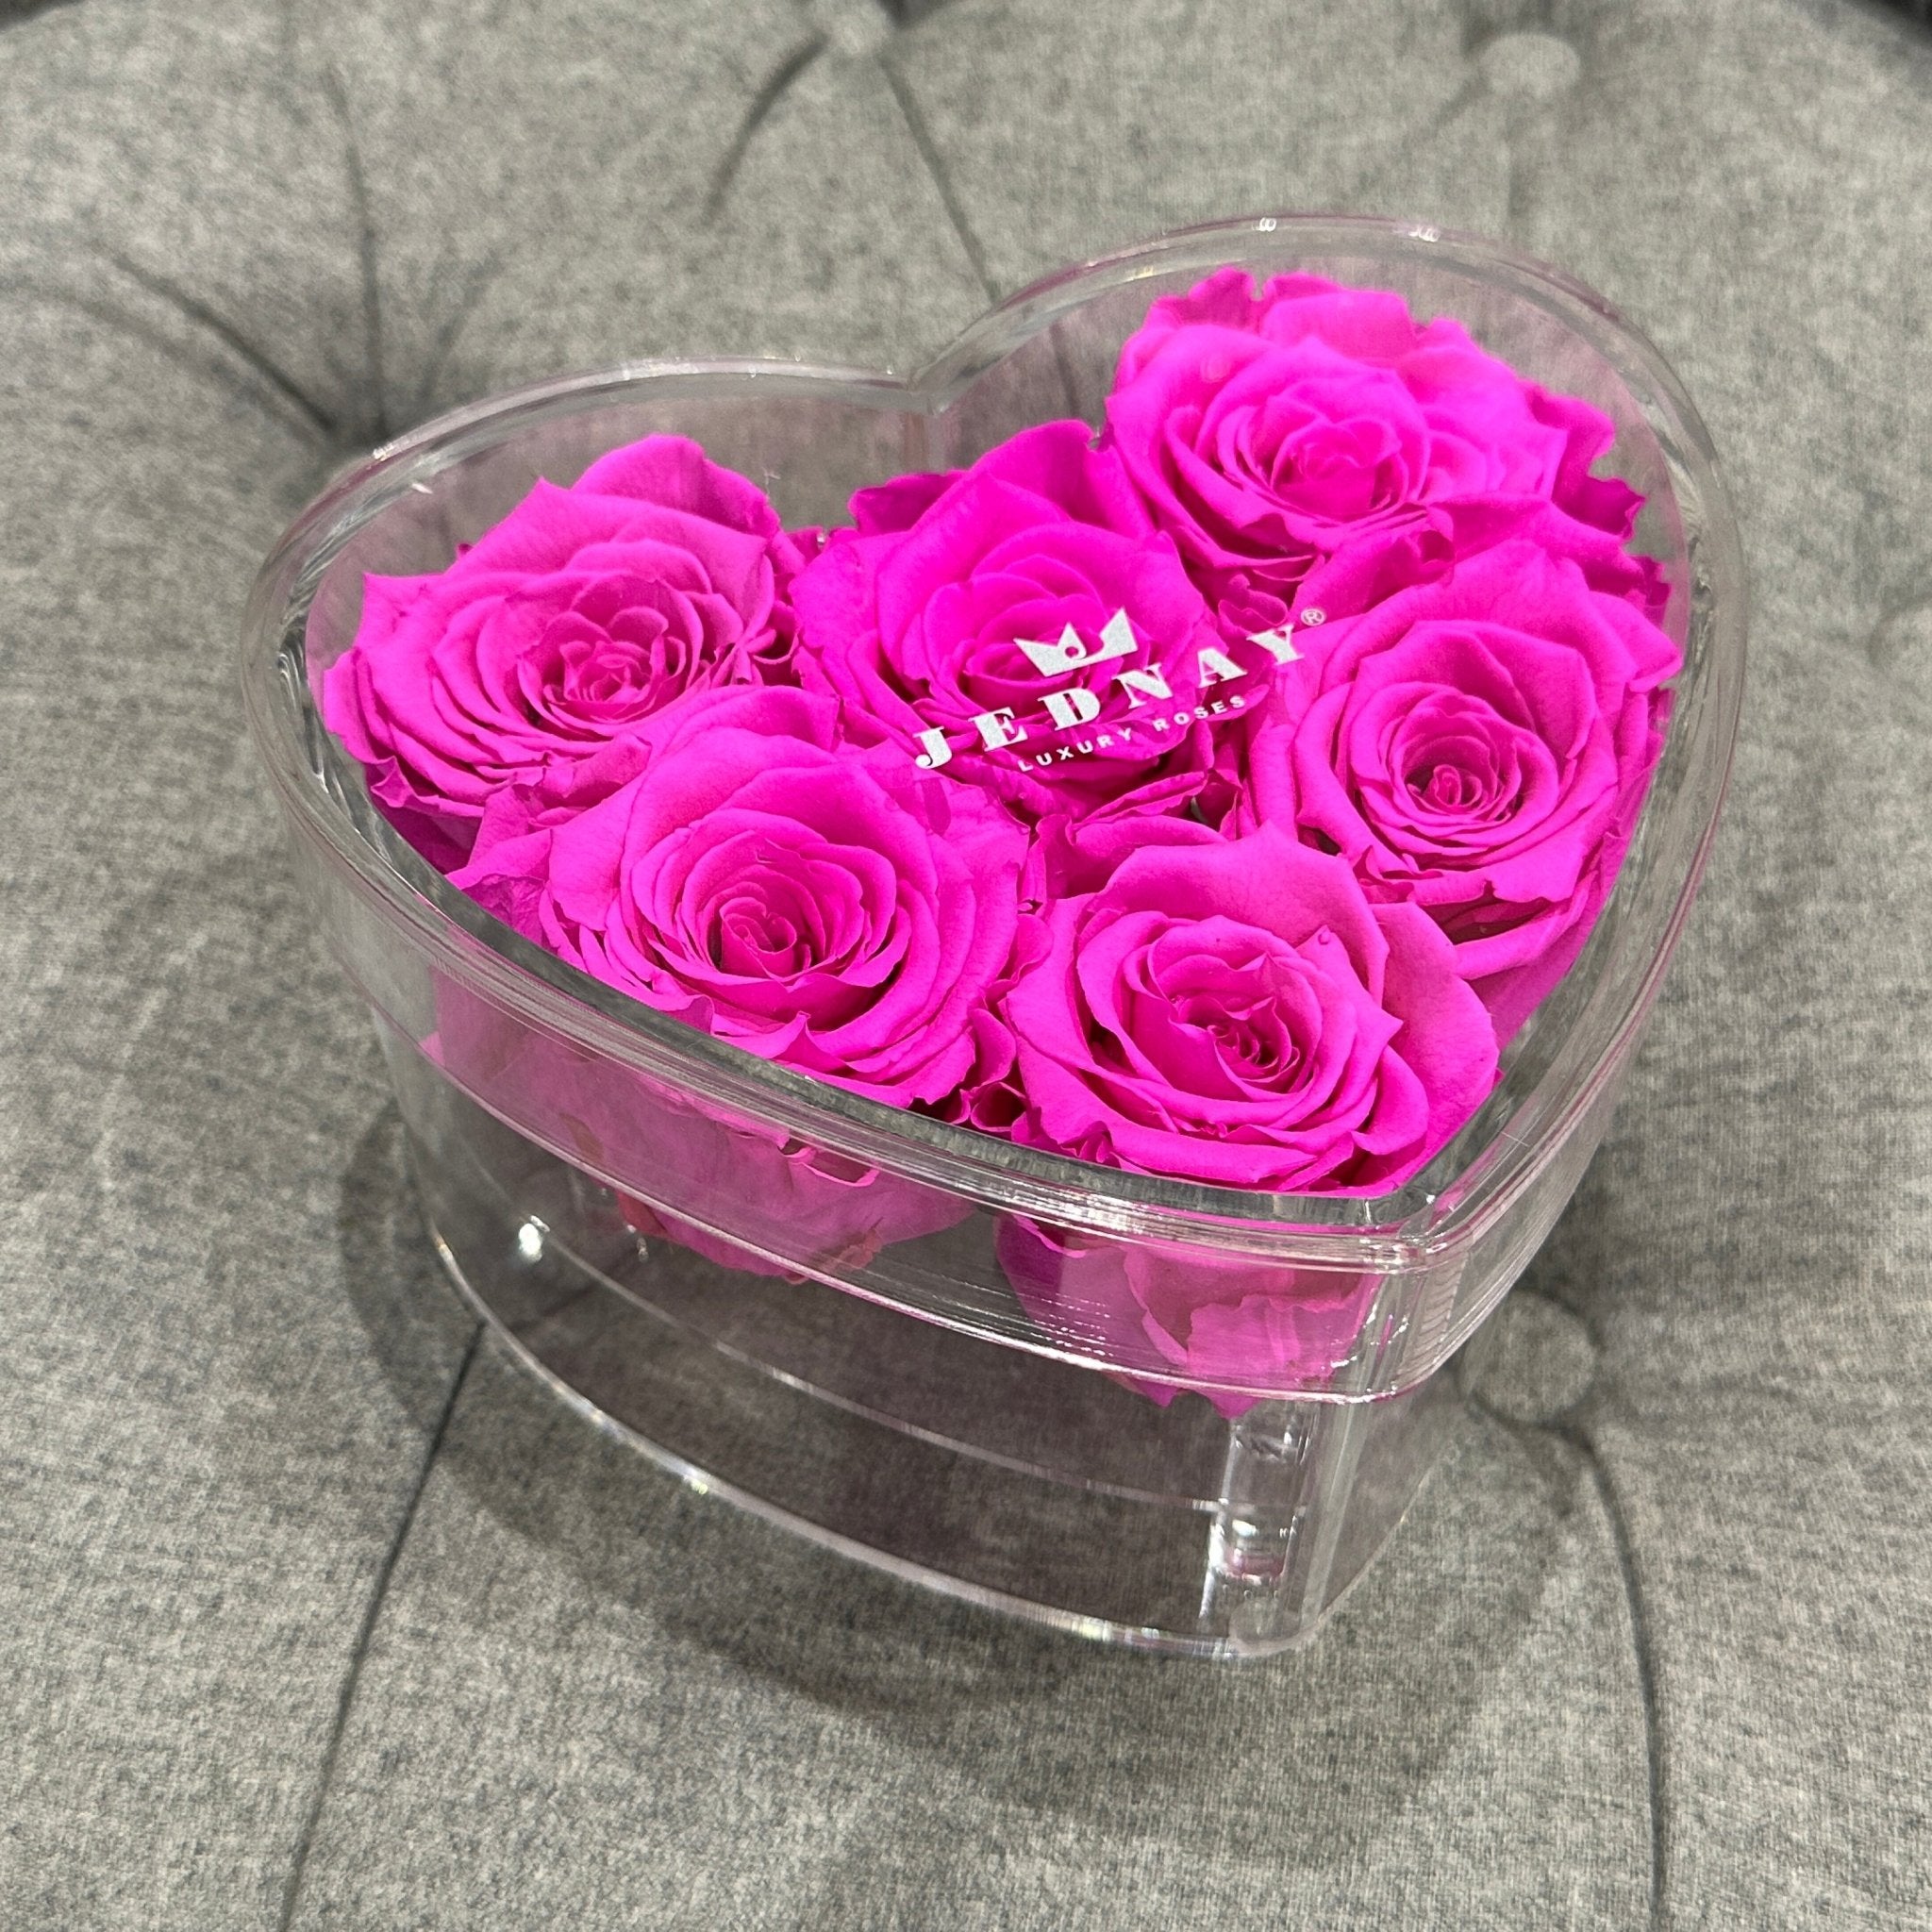 The Clarity Love Six - Bubblegum Pink Eternal Roses - Jednay Roses